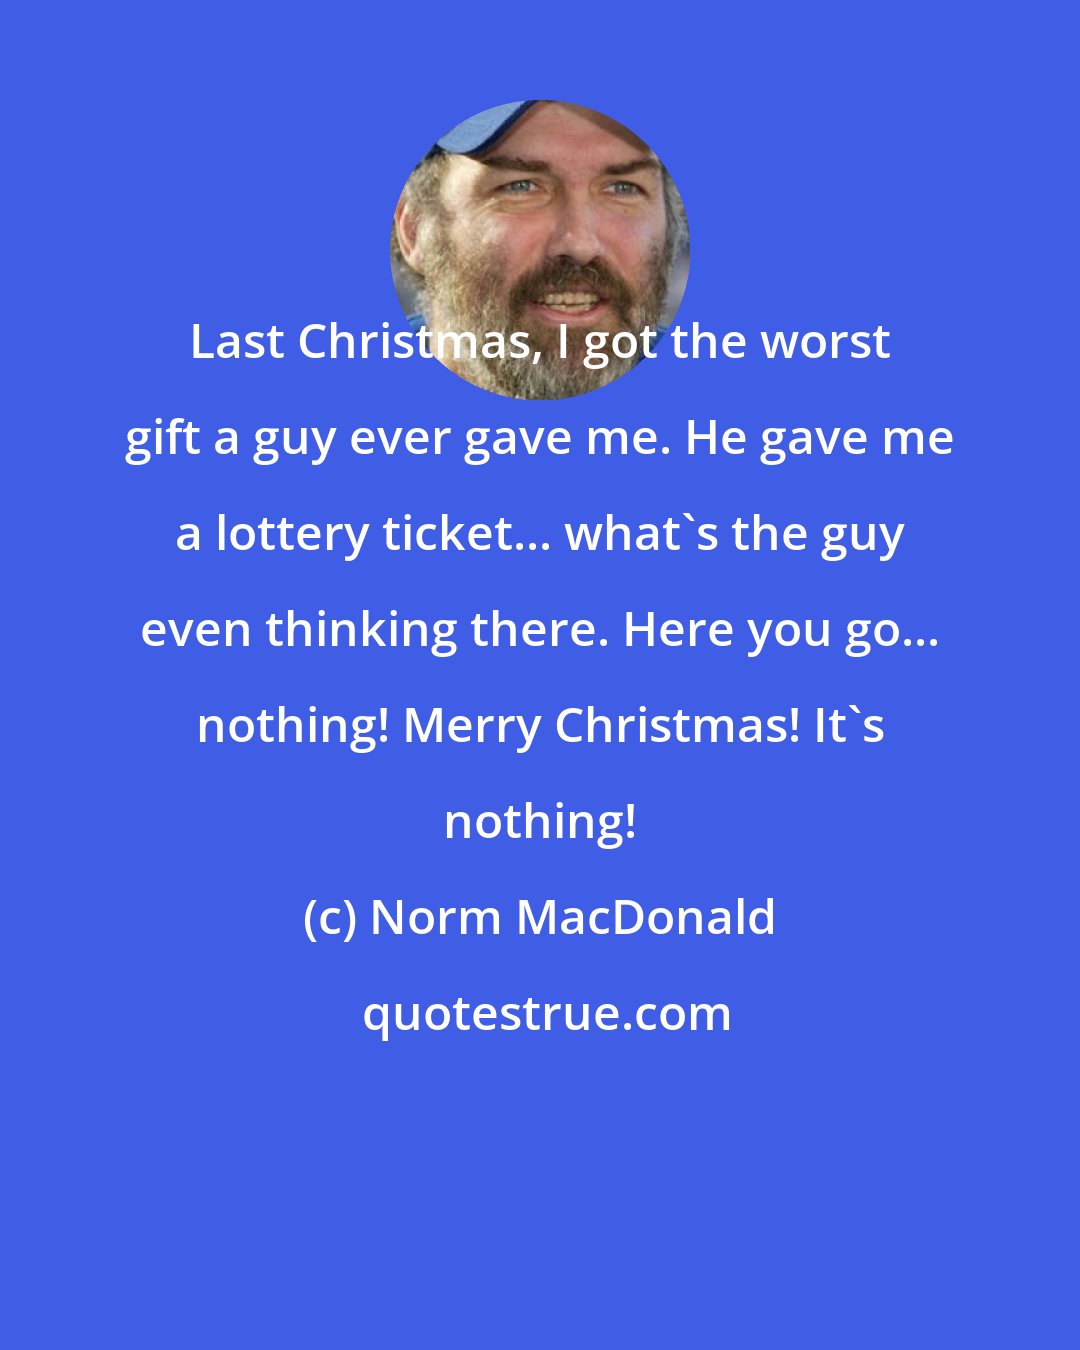 Norm MacDonald: Last Christmas, I got the worst gift a guy ever gave me. He gave me a lottery ticket... what's the guy even thinking there. Here you go... nothing! Merry Christmas! It's nothing!